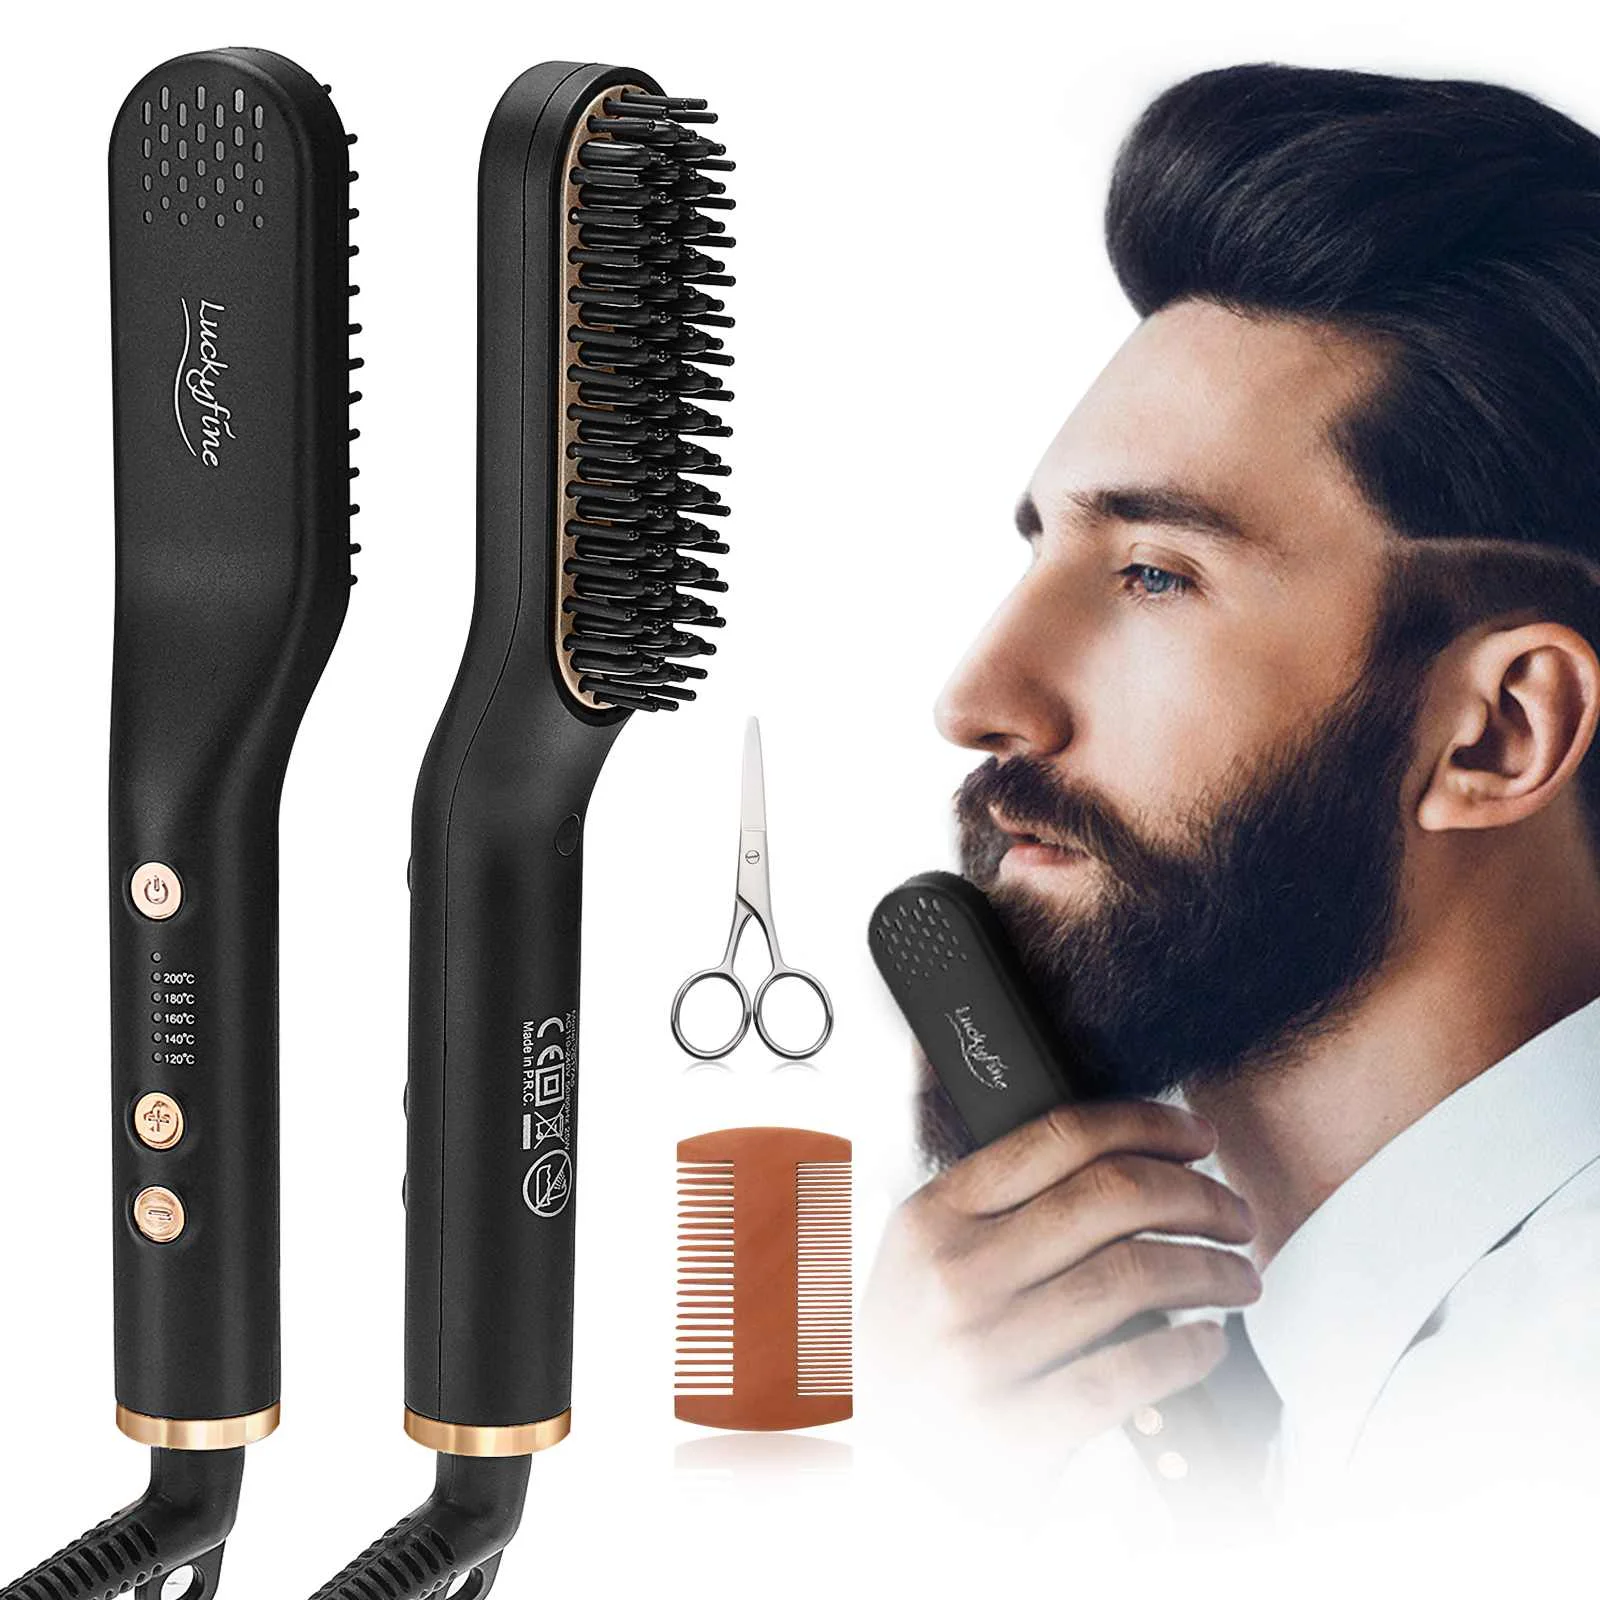 

Luckyfine 5 Gears 2 In 1 Electric Beard Hair Straightener Professional Portable Soft/ Thick Mustache Hair Comb Set With Box